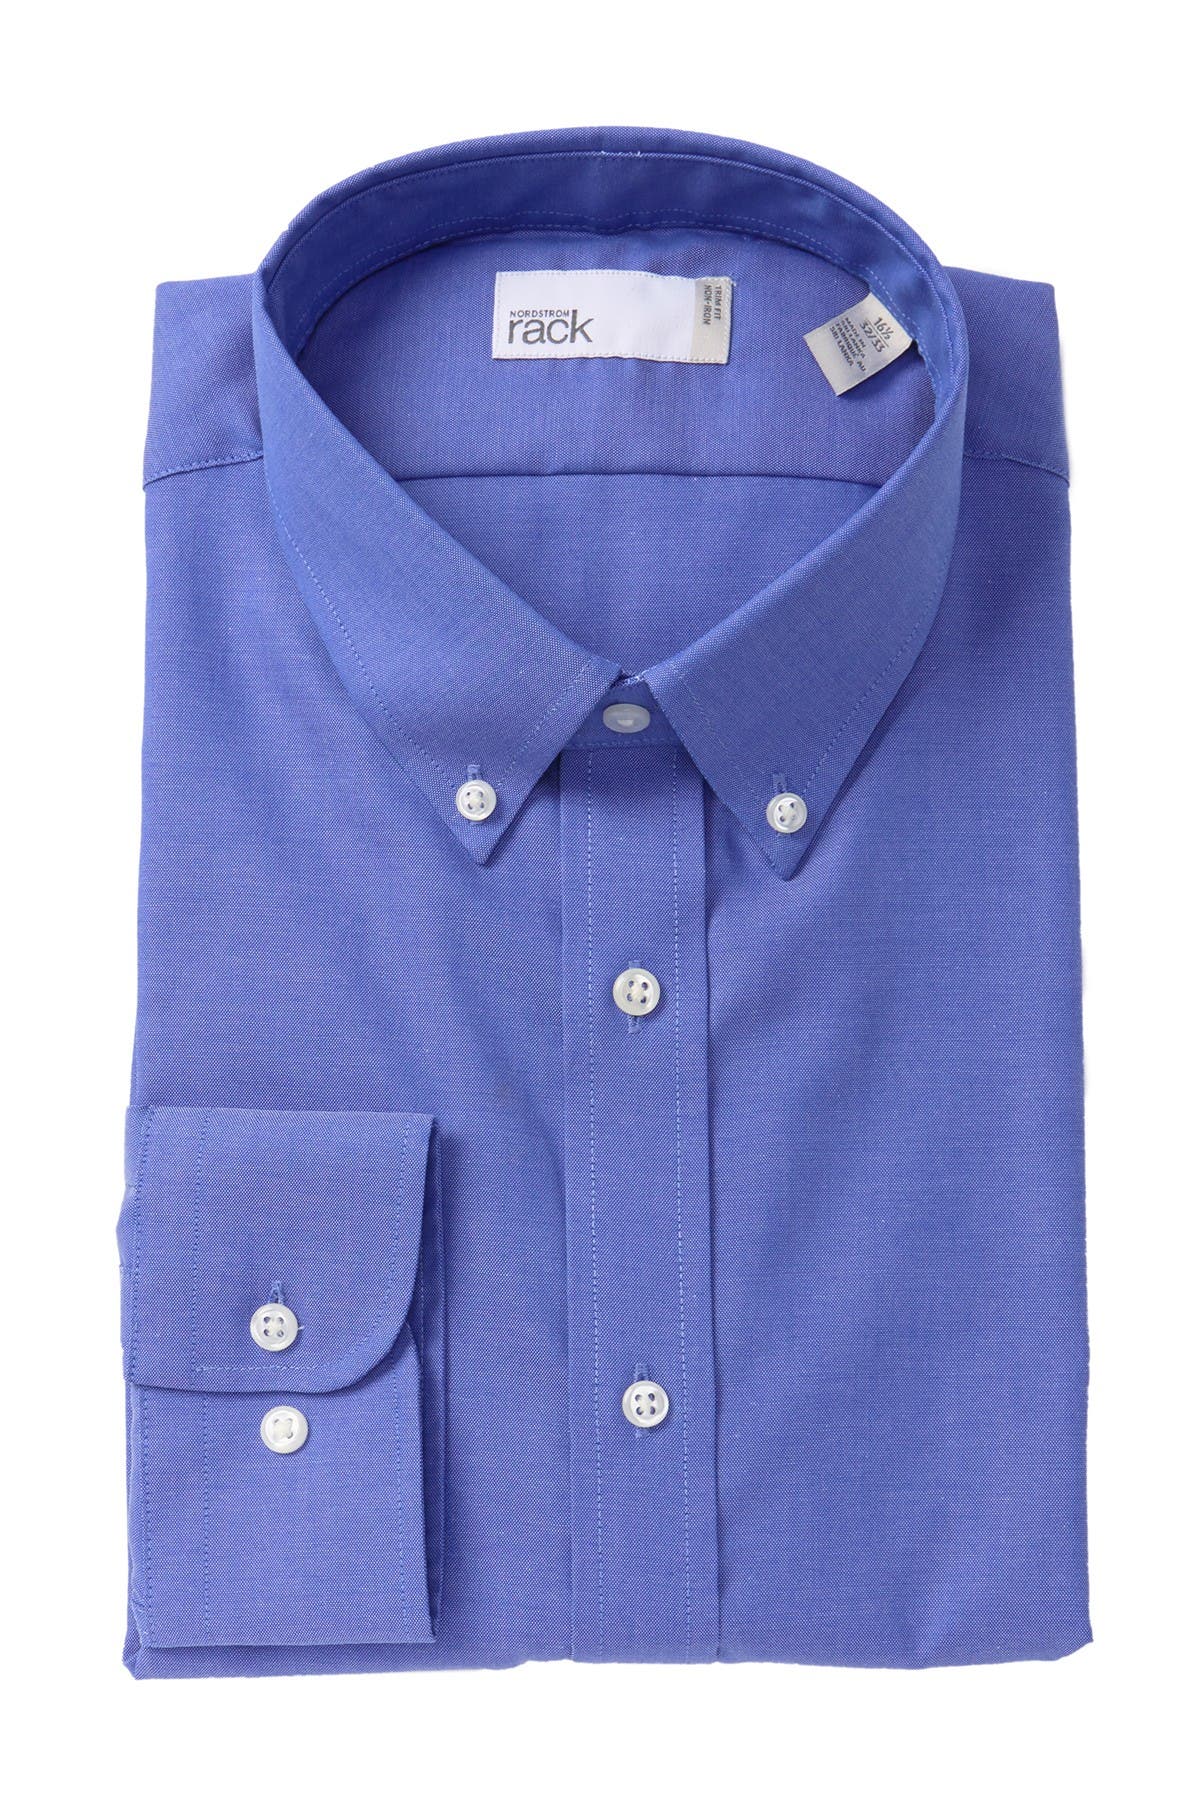 Nordstrom Rack Non-Iron Mens 17 36/37 Solid Traditional Fit Blue Dress Shirt